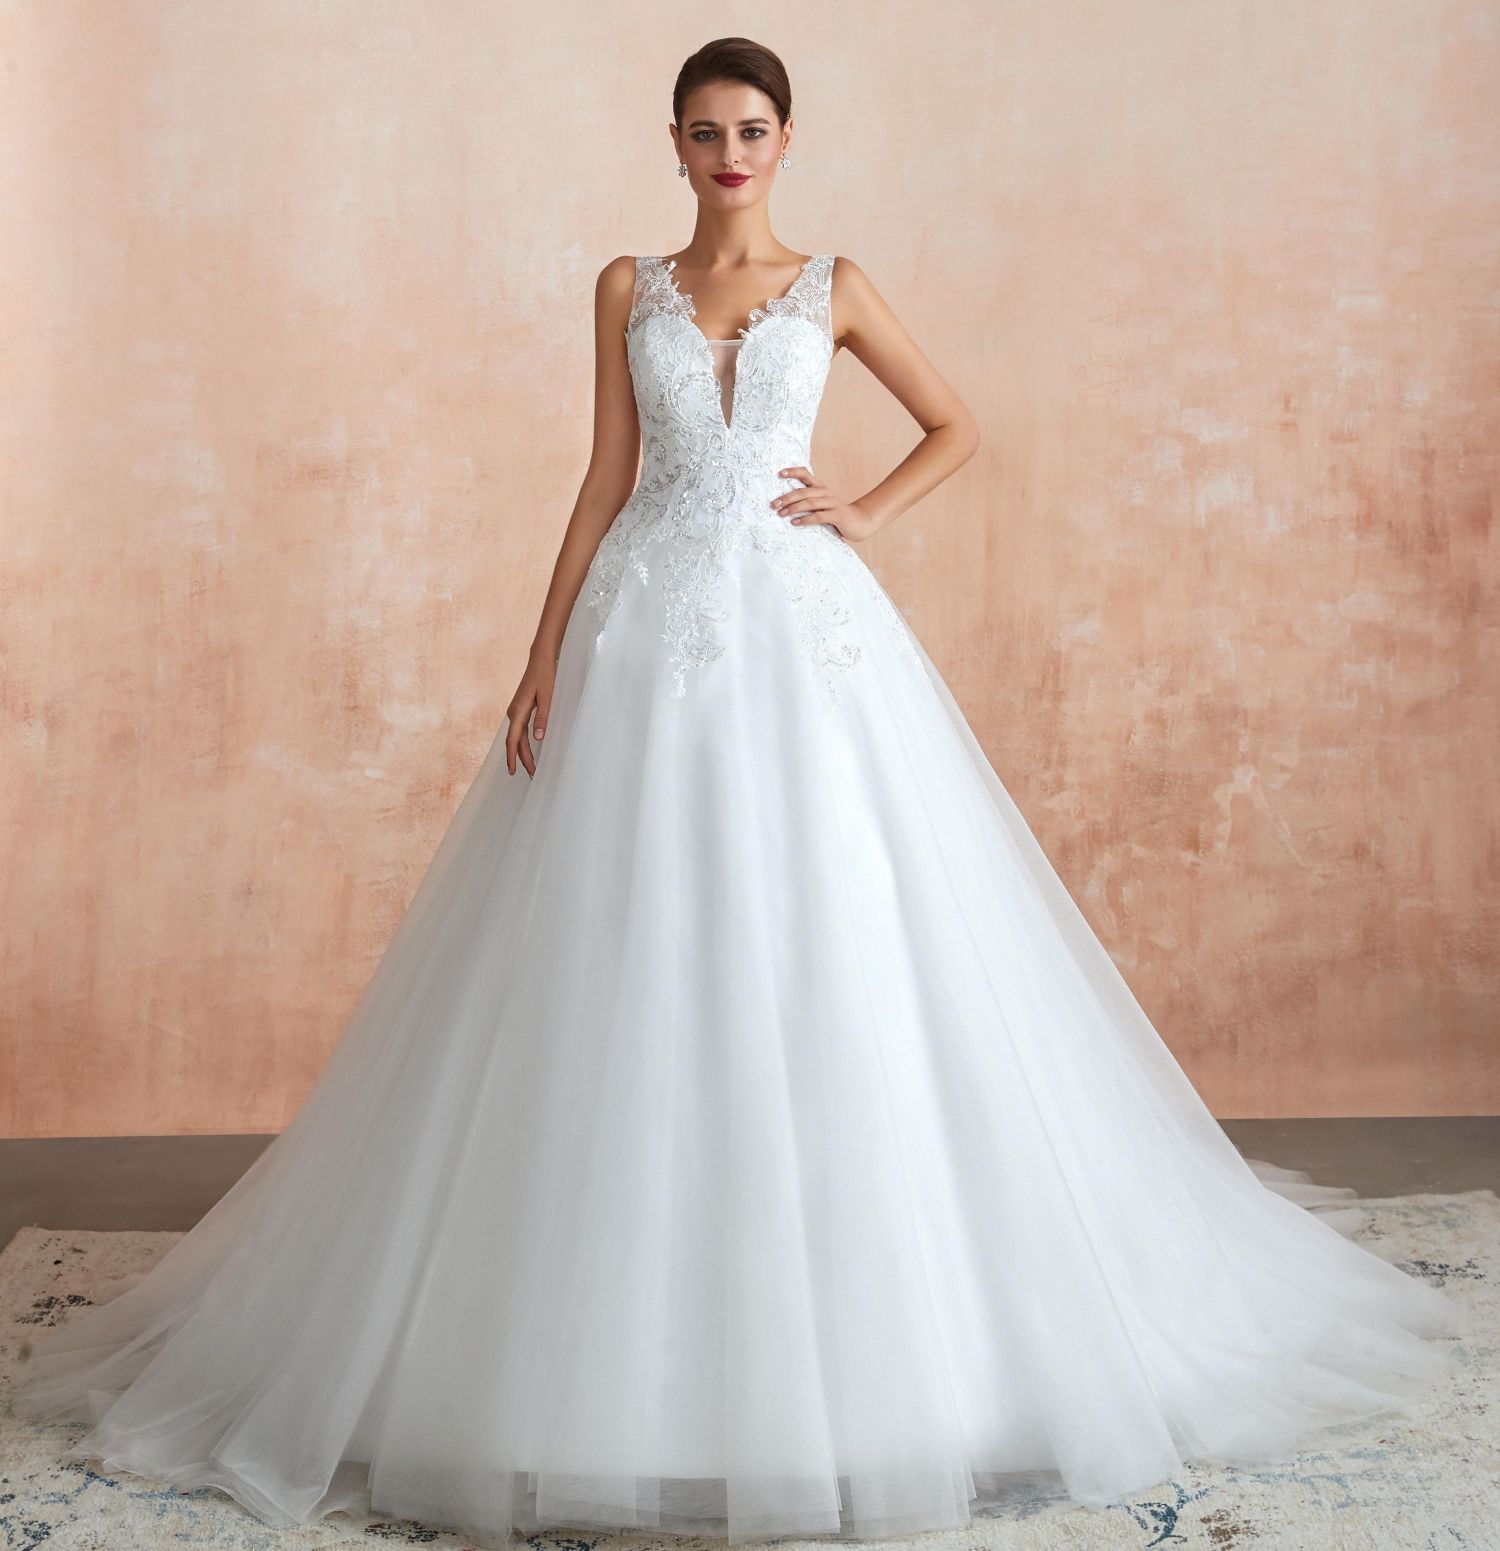 A romantic A-line wedding dress with a sheer bodice, long 